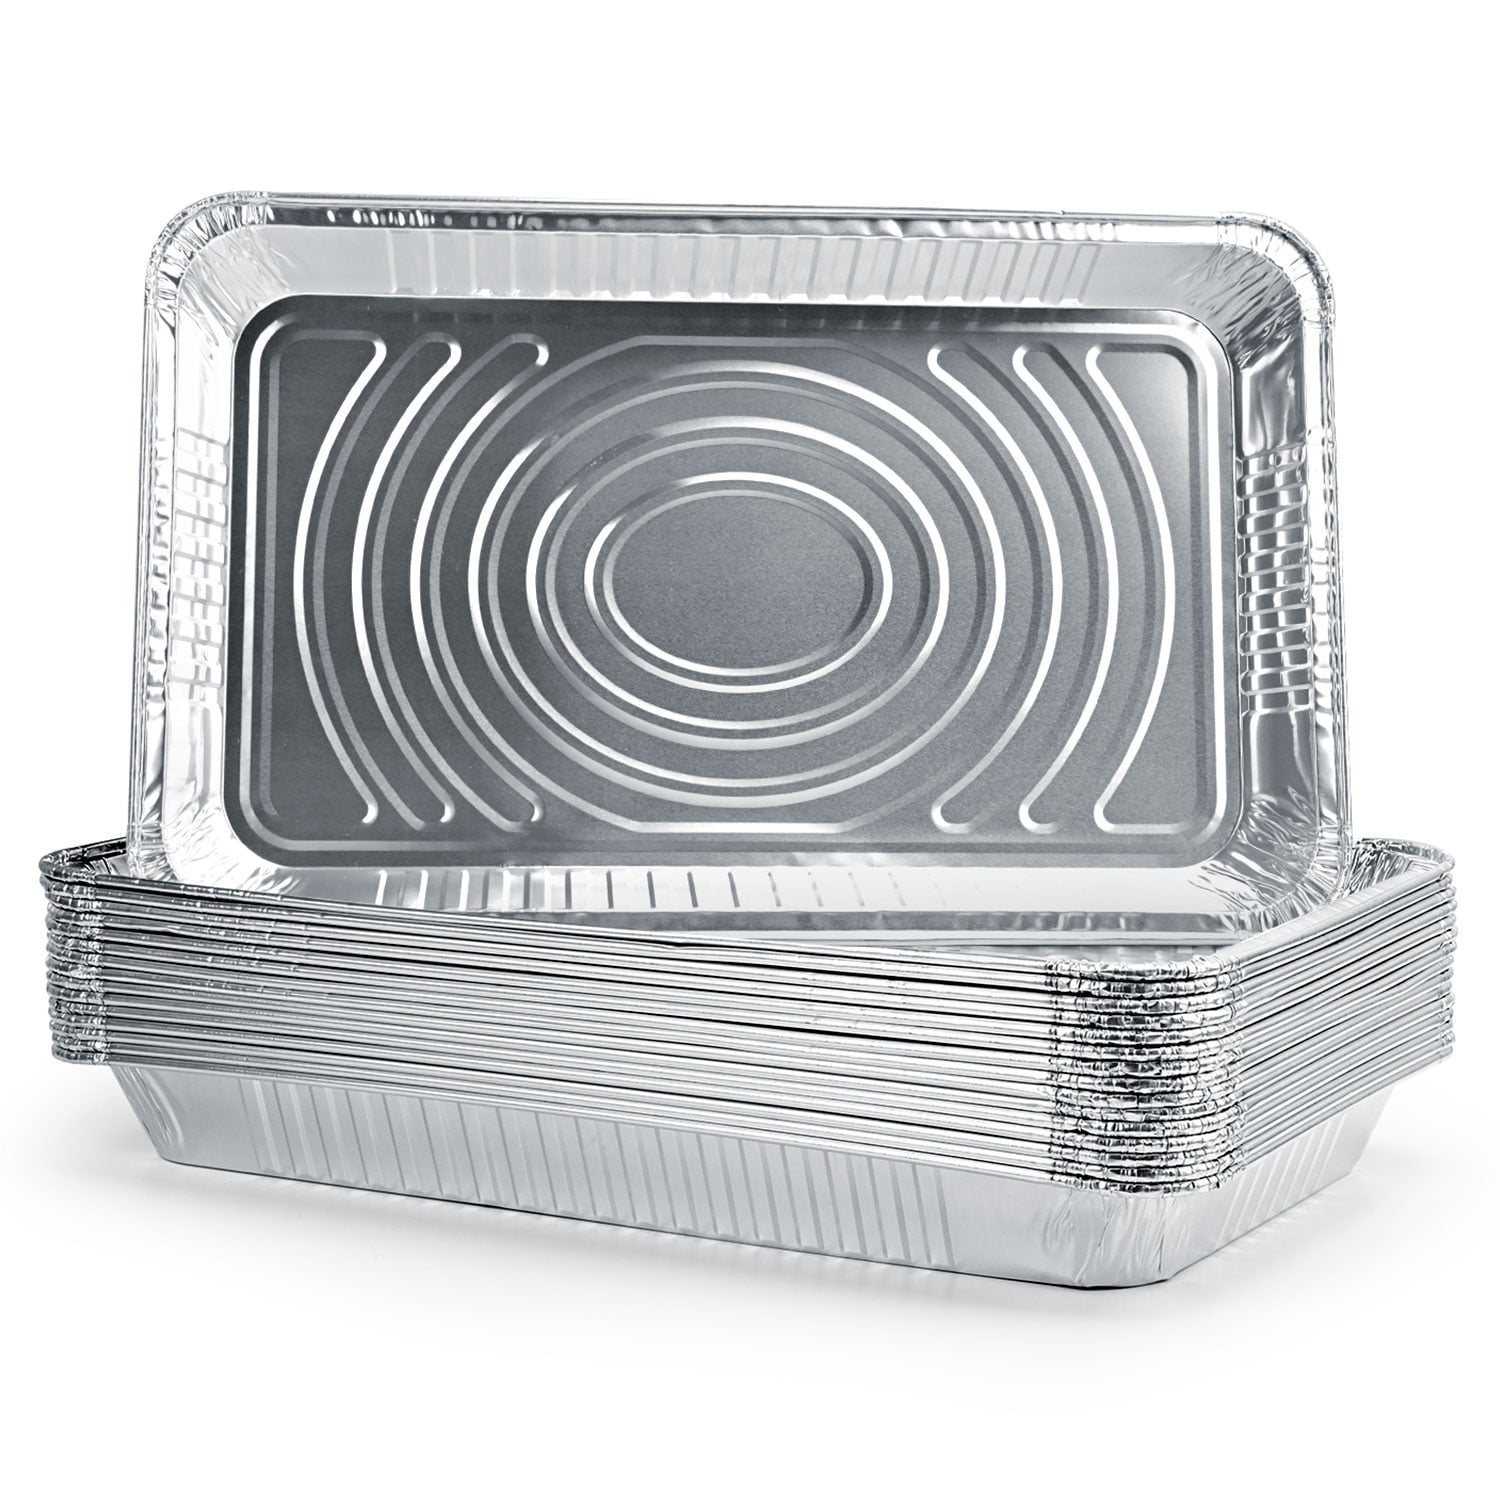 VeZee's Disposable 9X13 Aluminum Foil/Pan With Aluminum Lids Half Size Deep  Steam Table Bakeware - Cookware Perfect for Baking Cakes, Bread, Meatloaf